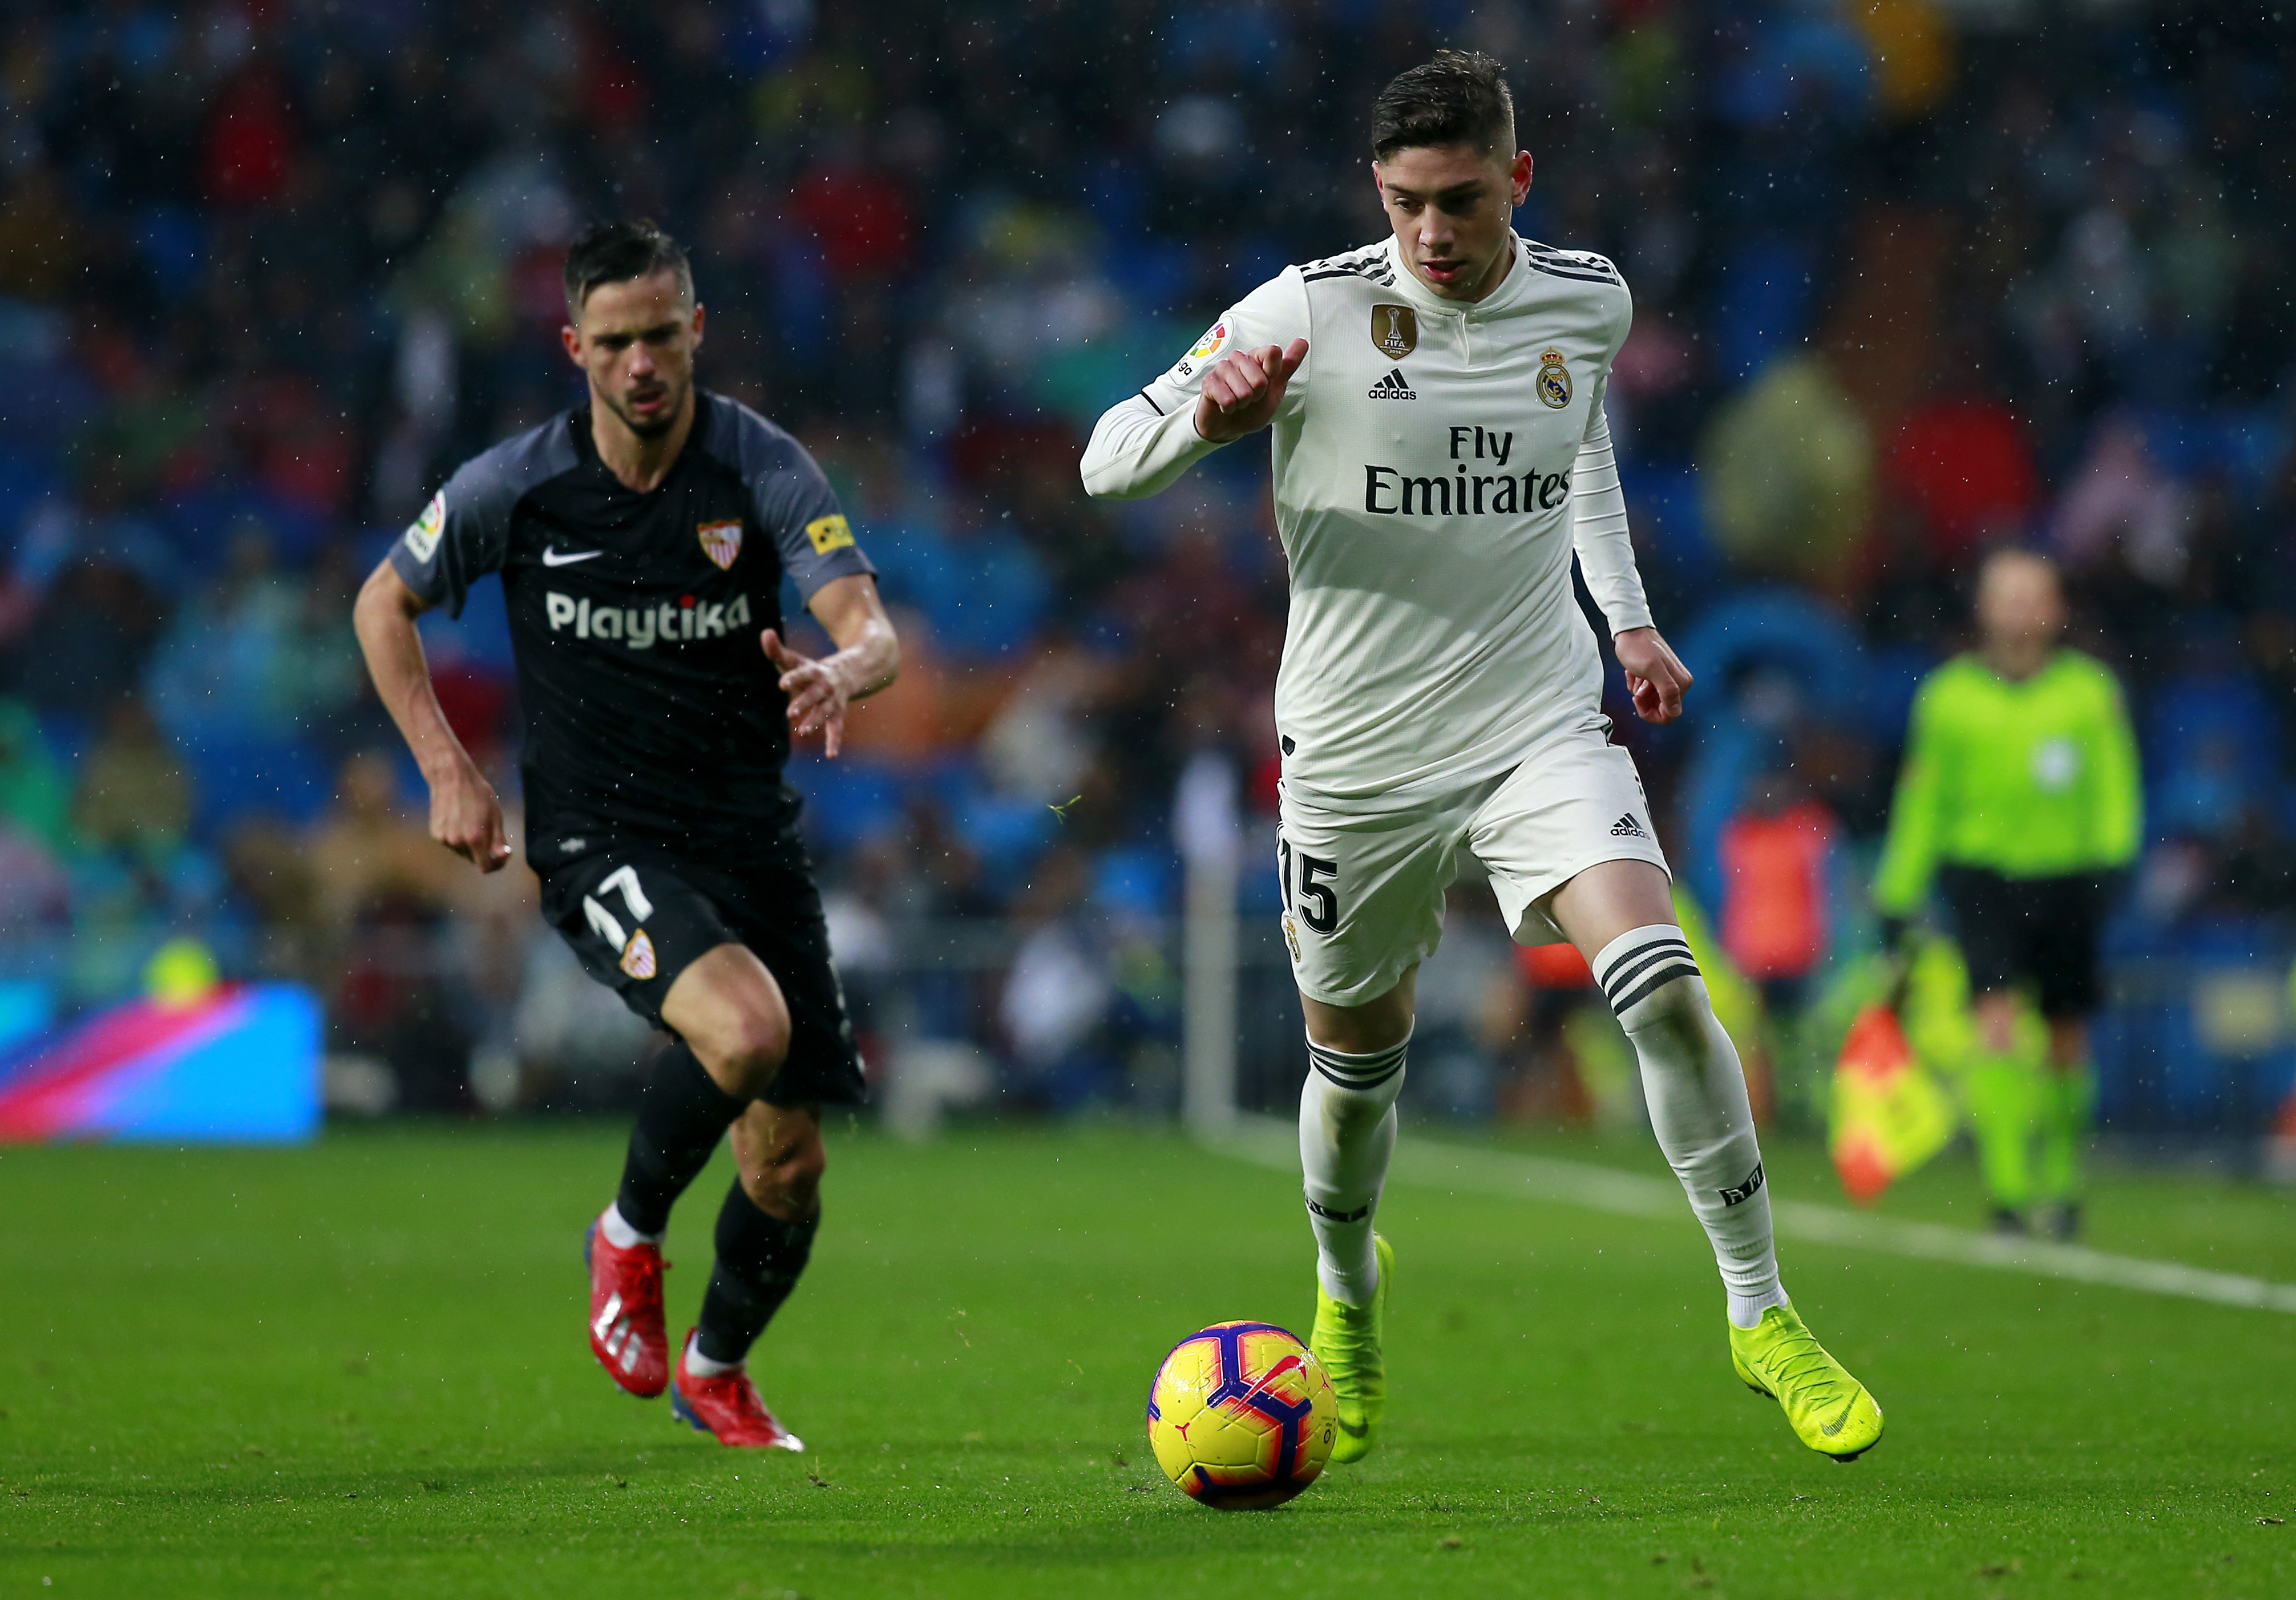 MADRID, SPAIN - JANUARY 19: Federico Valverde of Real Madrid runs with the ball during the La Liga match between Real Madrid CF and Sevilla FC at Estadio Santiago Bernabeu on January 19, 2019 in Madrid, Spain.  (Photo by Gonzalo Arroyo Moreno/Getty Images)